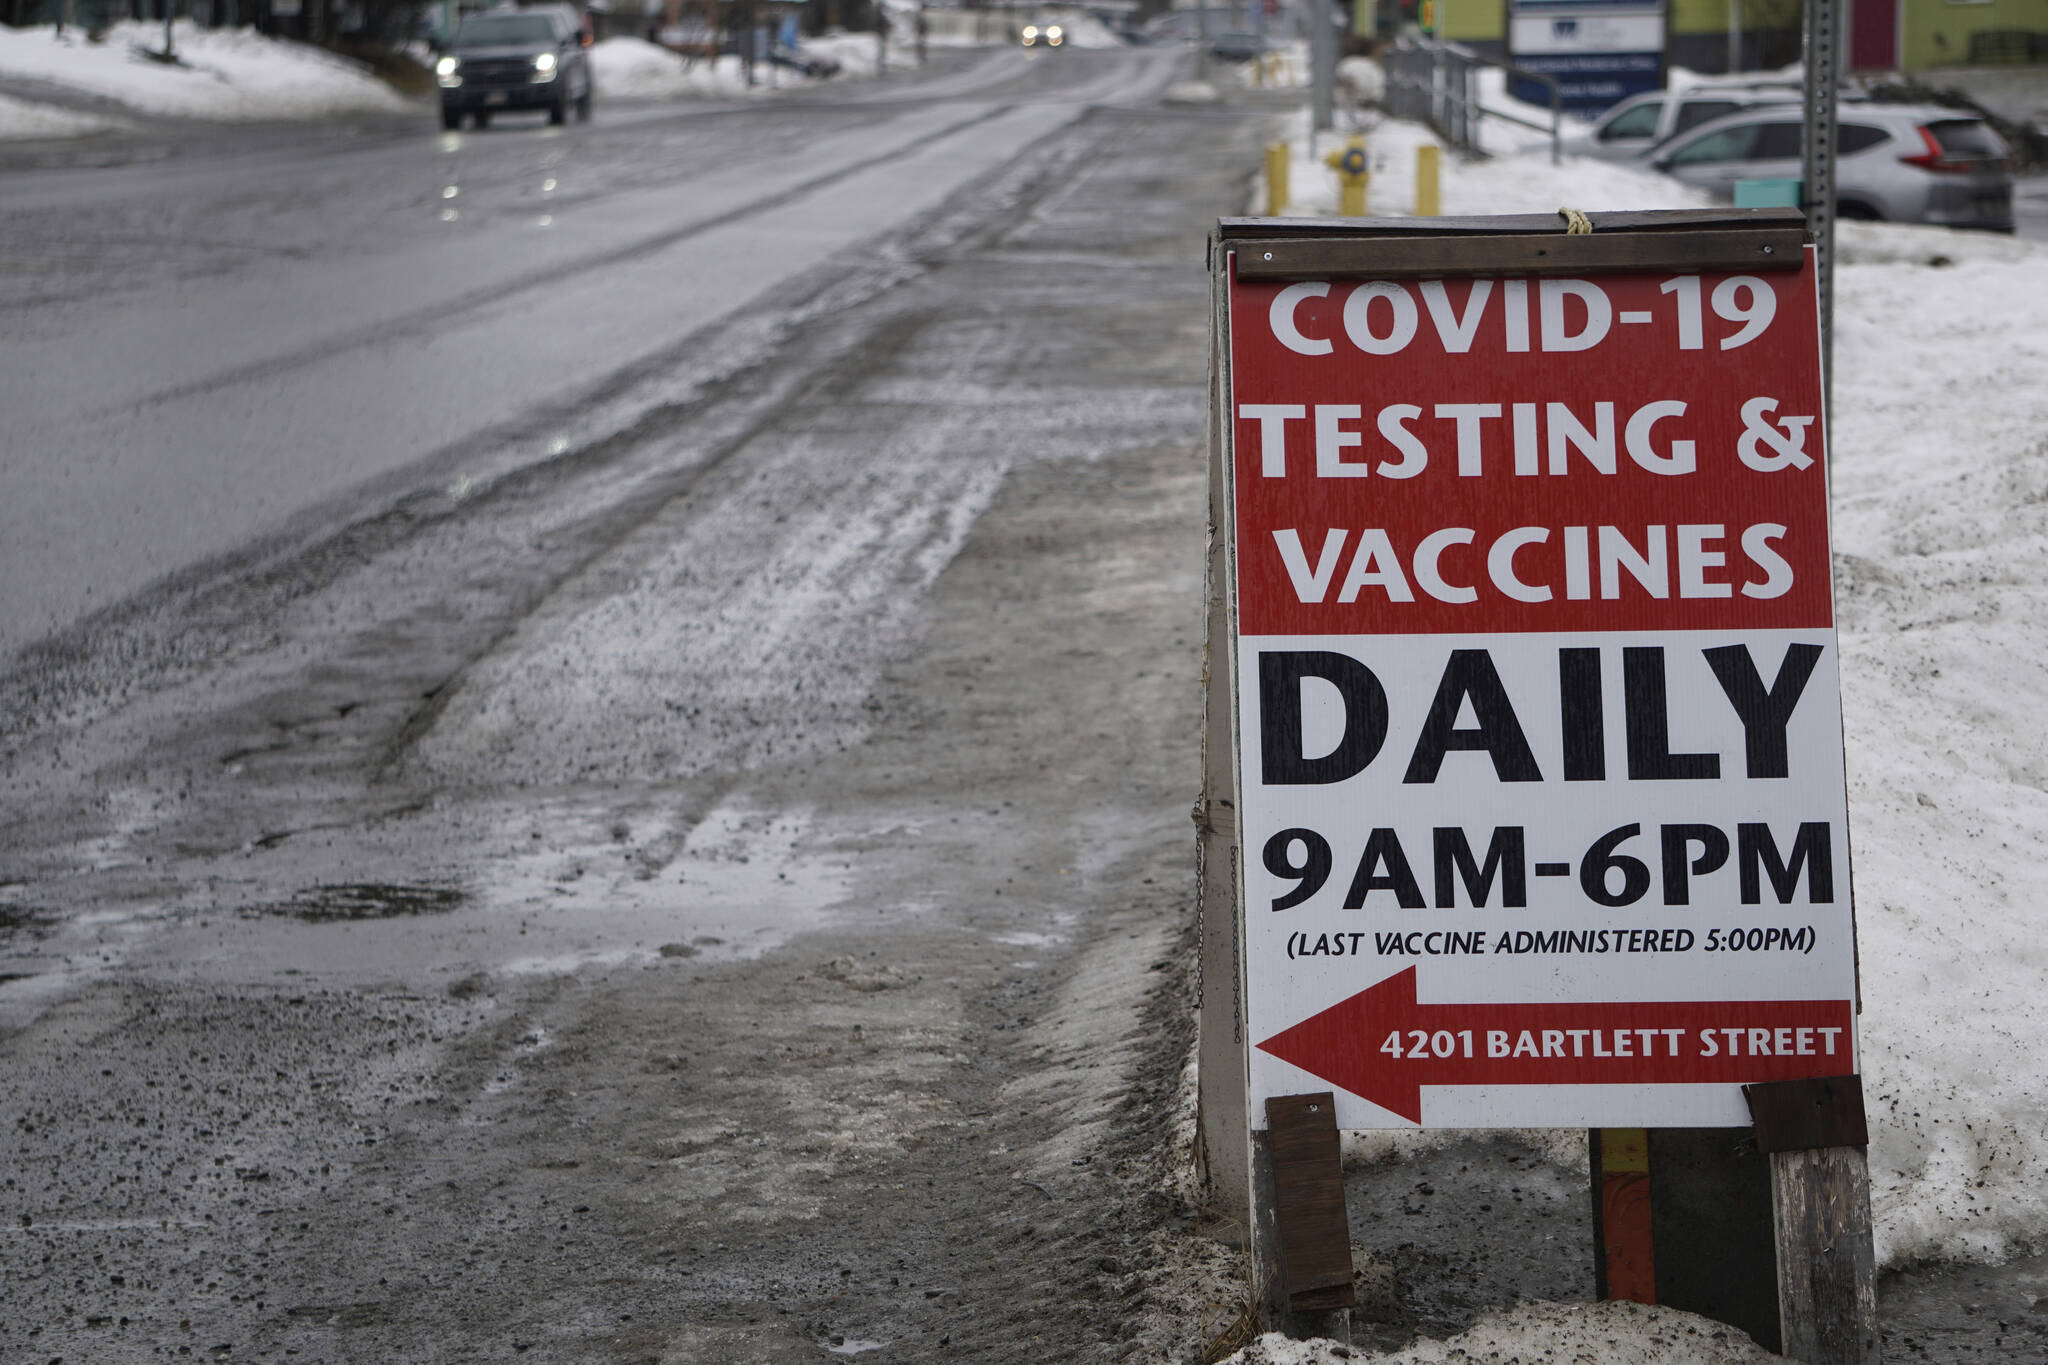 Photo by Michael Armstrong/Homer News
A sign at the corner of Pioneer Avenue and Bartlett Street points the way to the South Peninsula Hospital COVID-19 testing and vaccine clinic on Bartlett Street on Feb. 17, 2021, in Homer, Alaska.
A sign at the corner of Pioneer Avenue and Bartlett Street points the way to the South Peninsula Hospital COVID-19 testing and vaccine clinic on Bartlett Street on Feb. 17, 2021, in Homer, Alaska. (Photo by Michael Armstrong/Homer News)